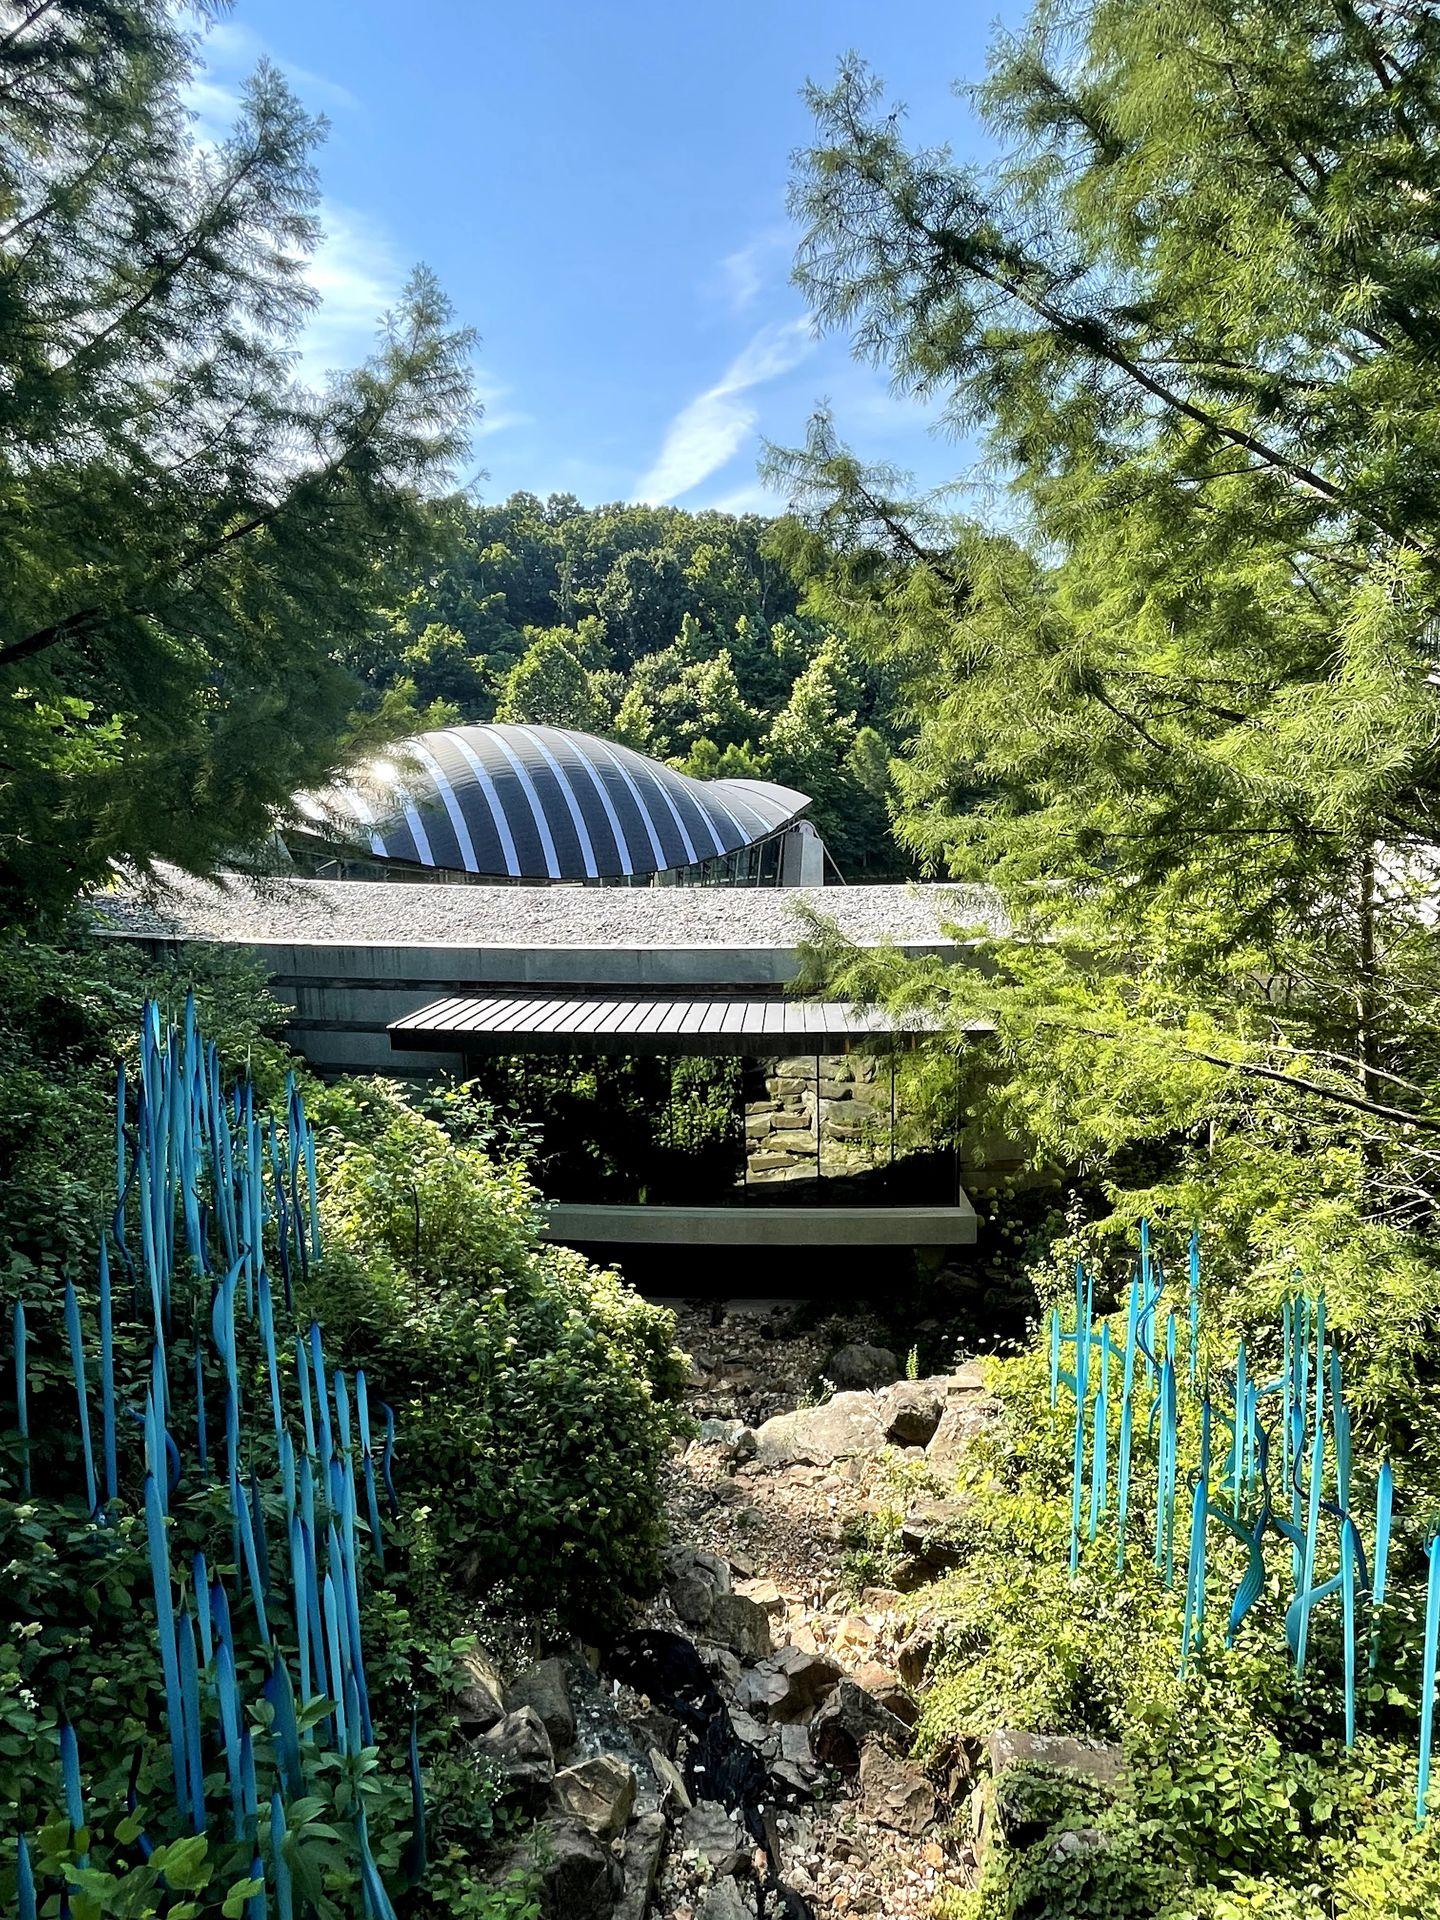 The Crystal Bridges museum with blue sculptures outside in Bentonville, Arkansas.